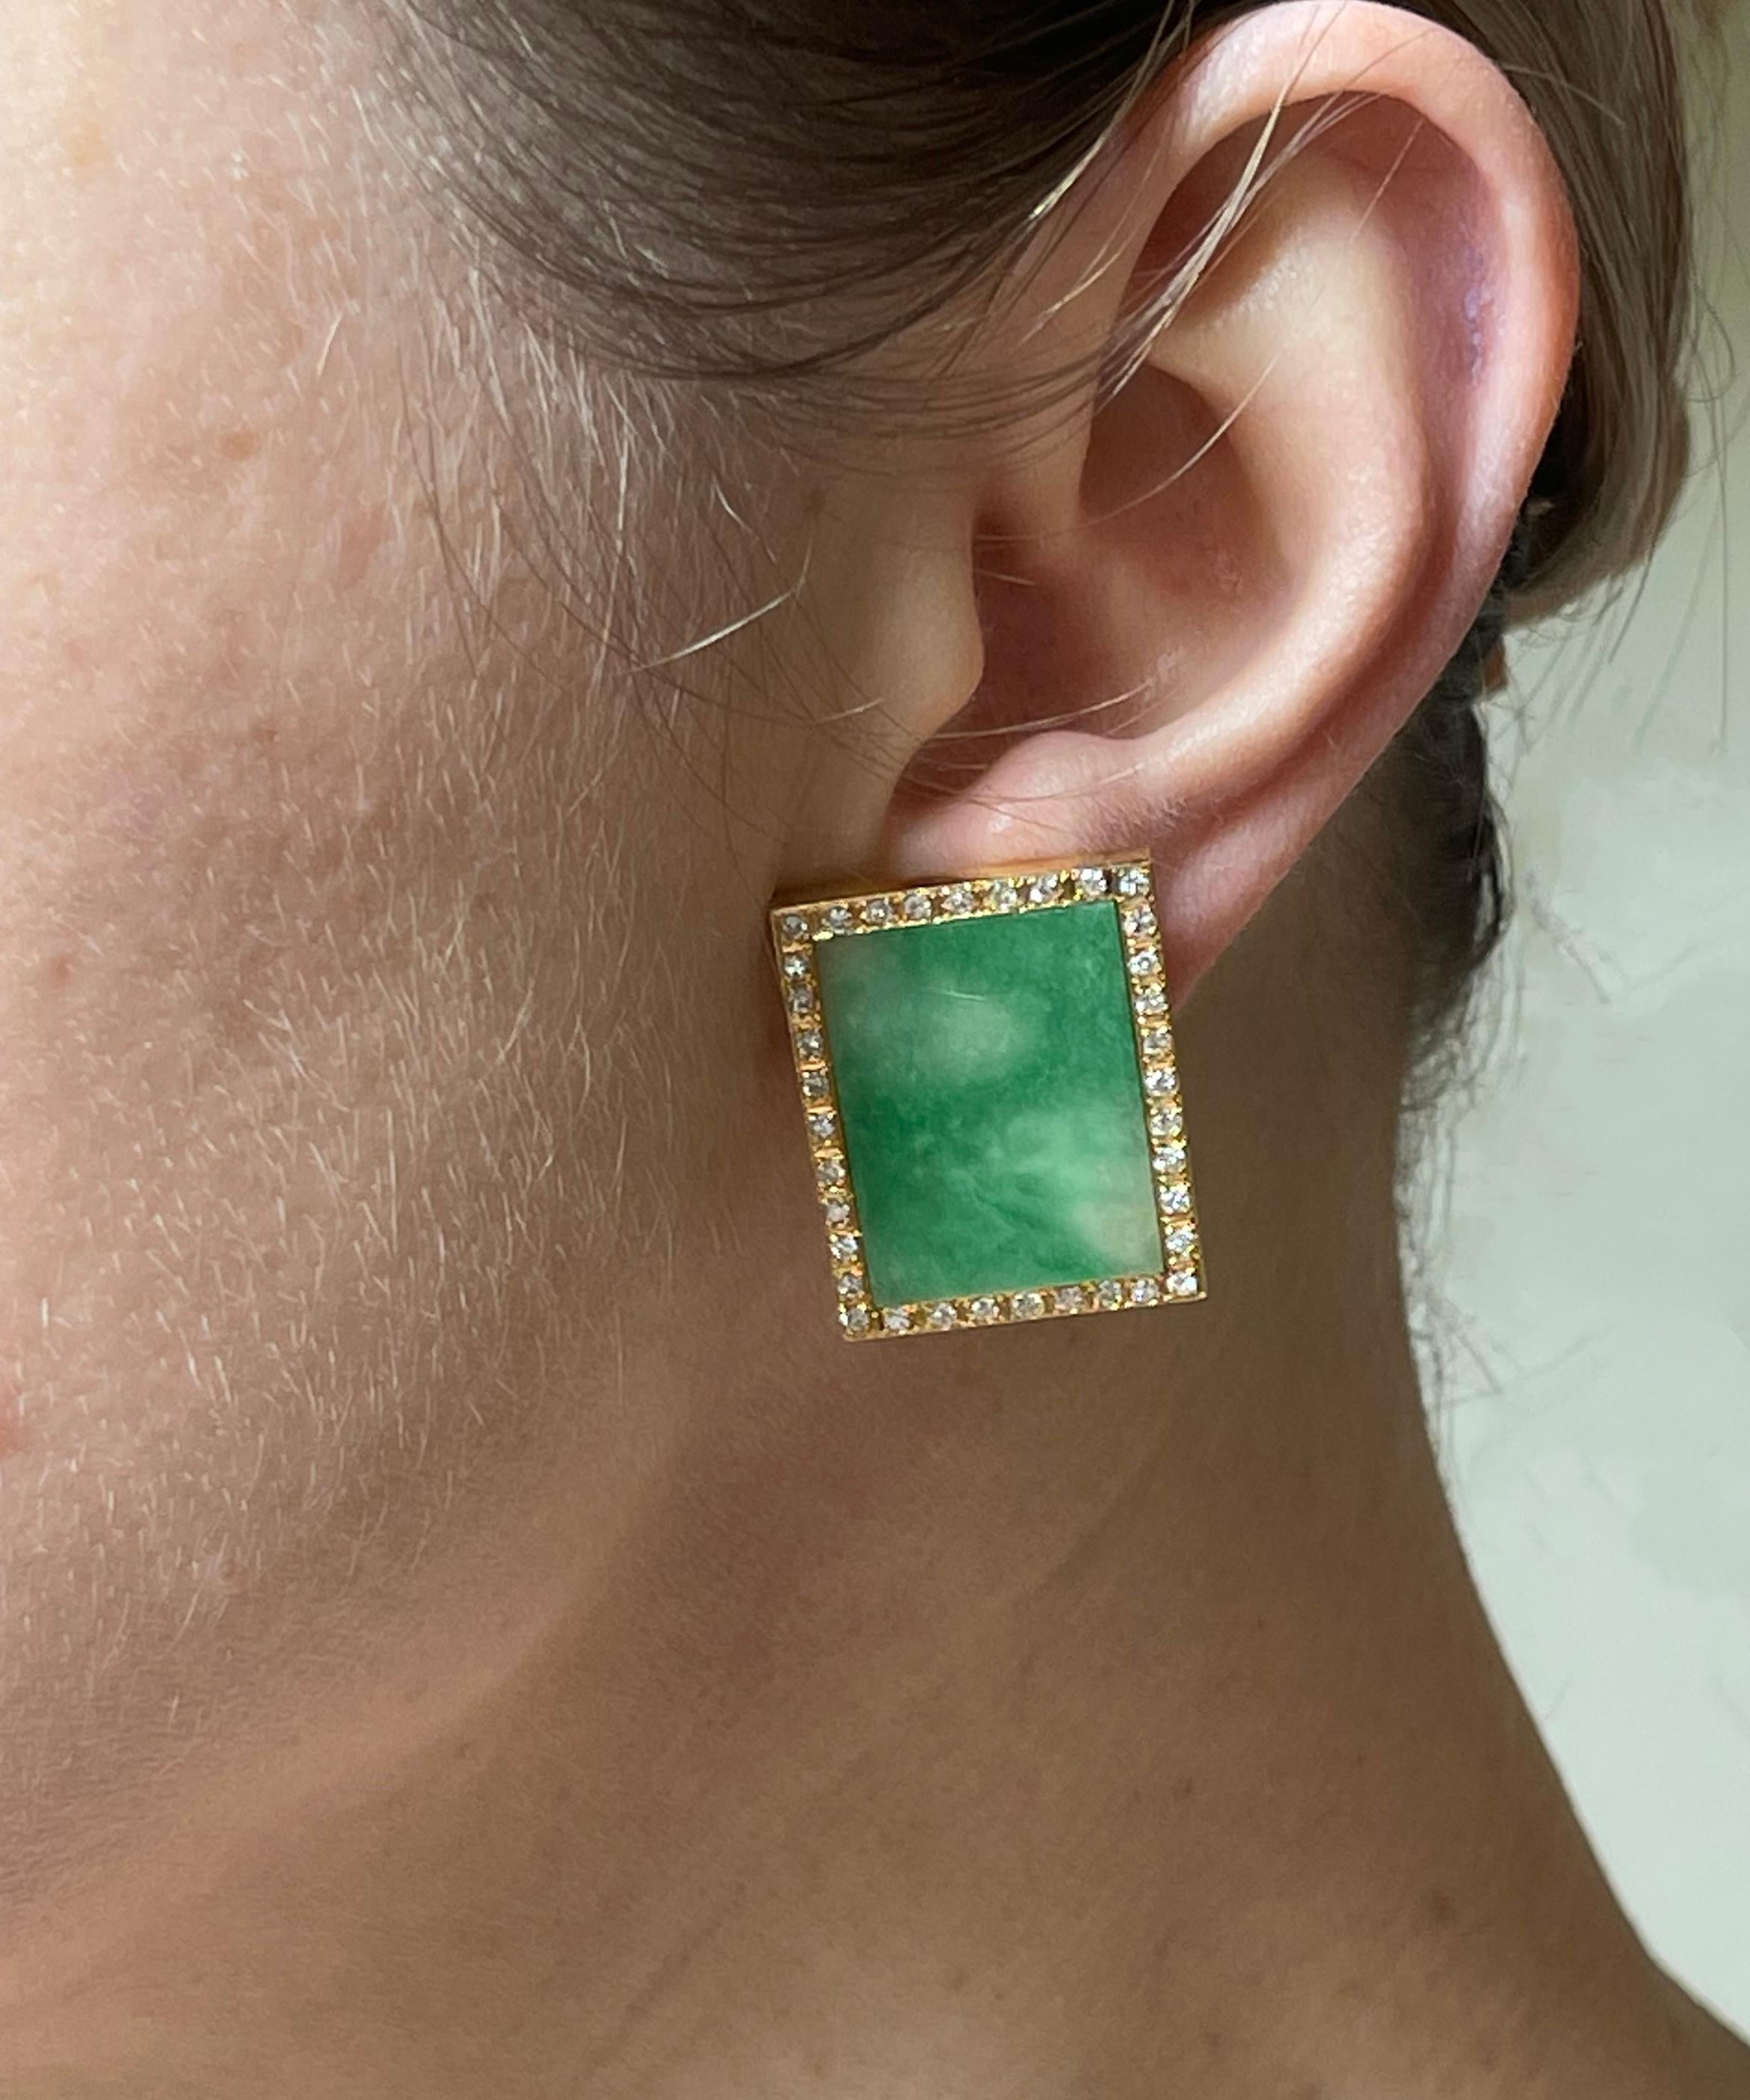 Pair of rectangular 14k gold earrings, set with center natural jadeite jade stones - measure approx. 22mm x 16mm. Jade is surrounded with a total of approx. 0.70ctw in H/SI diamonds. Earrings measure 1 1/16